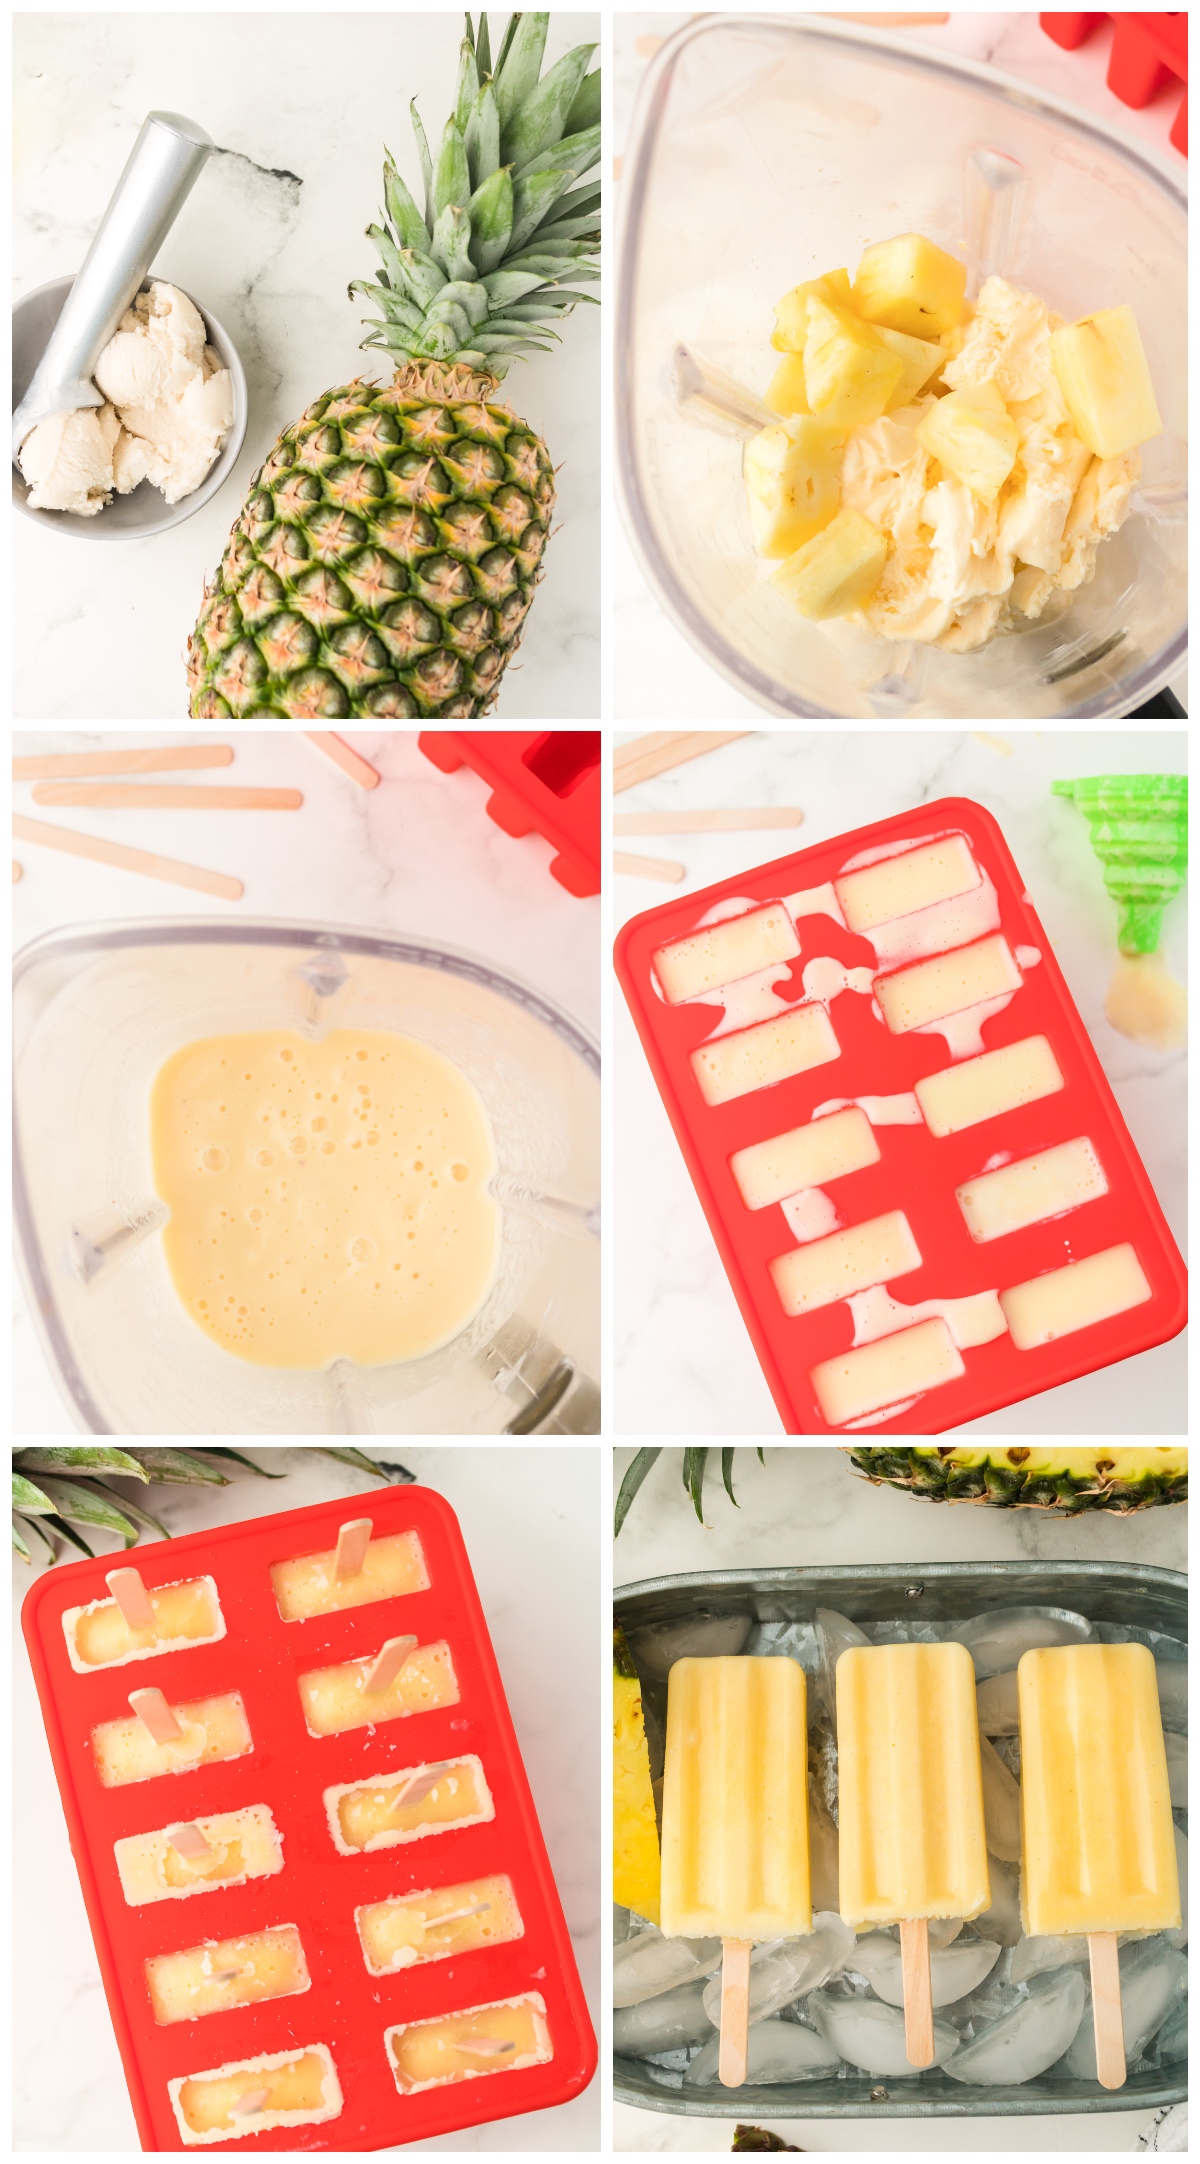 how to make dole whip popsicles step by step photo instructions